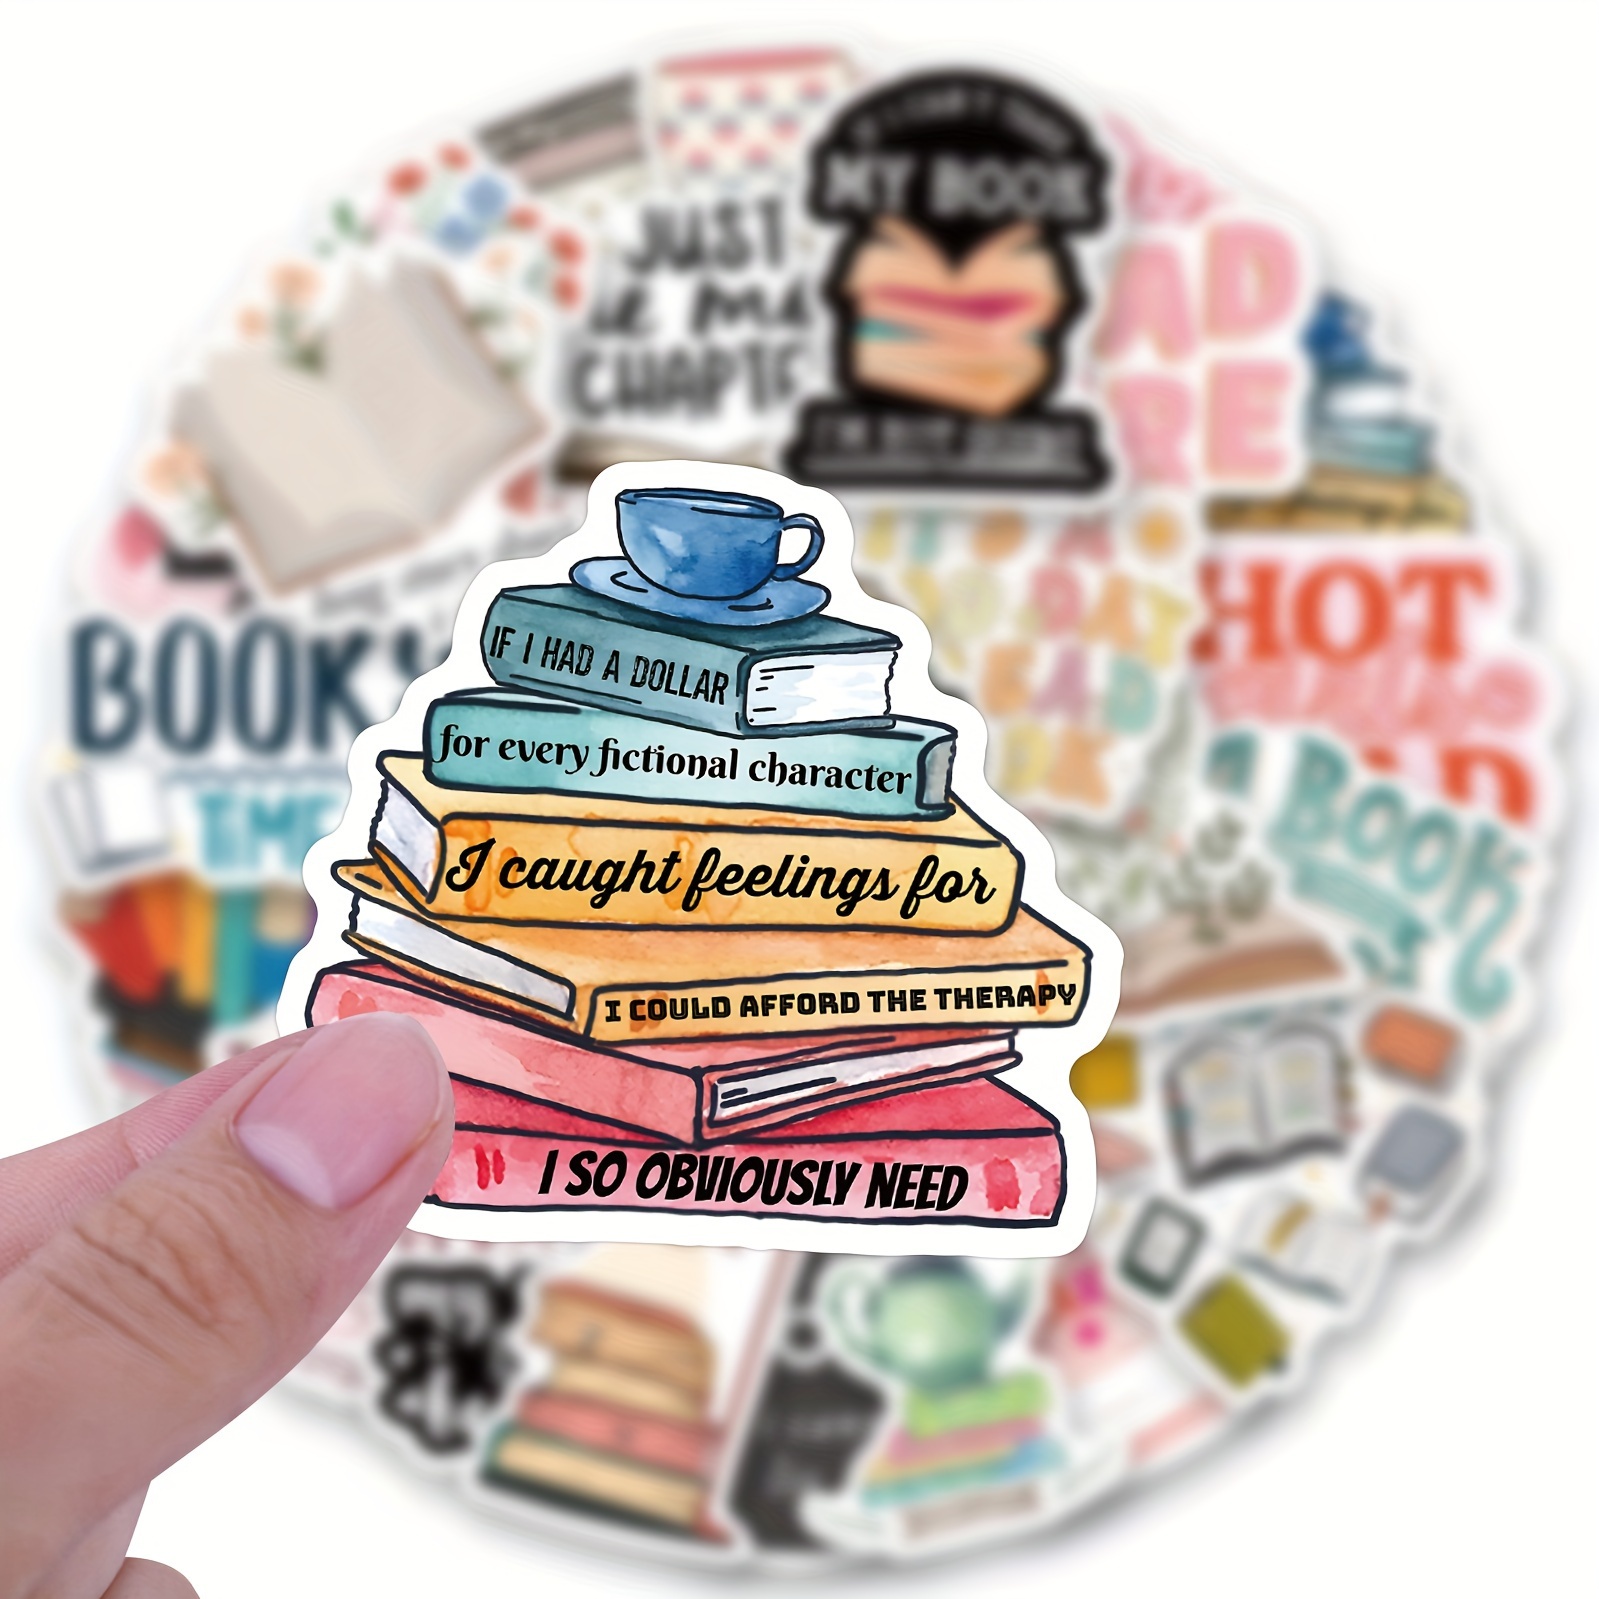 51pcs Bookish Stickers, Book Stickers For Kindle, Laptop Computer Phone  Water Bottle Waterproof Stickers Book Lover Gift